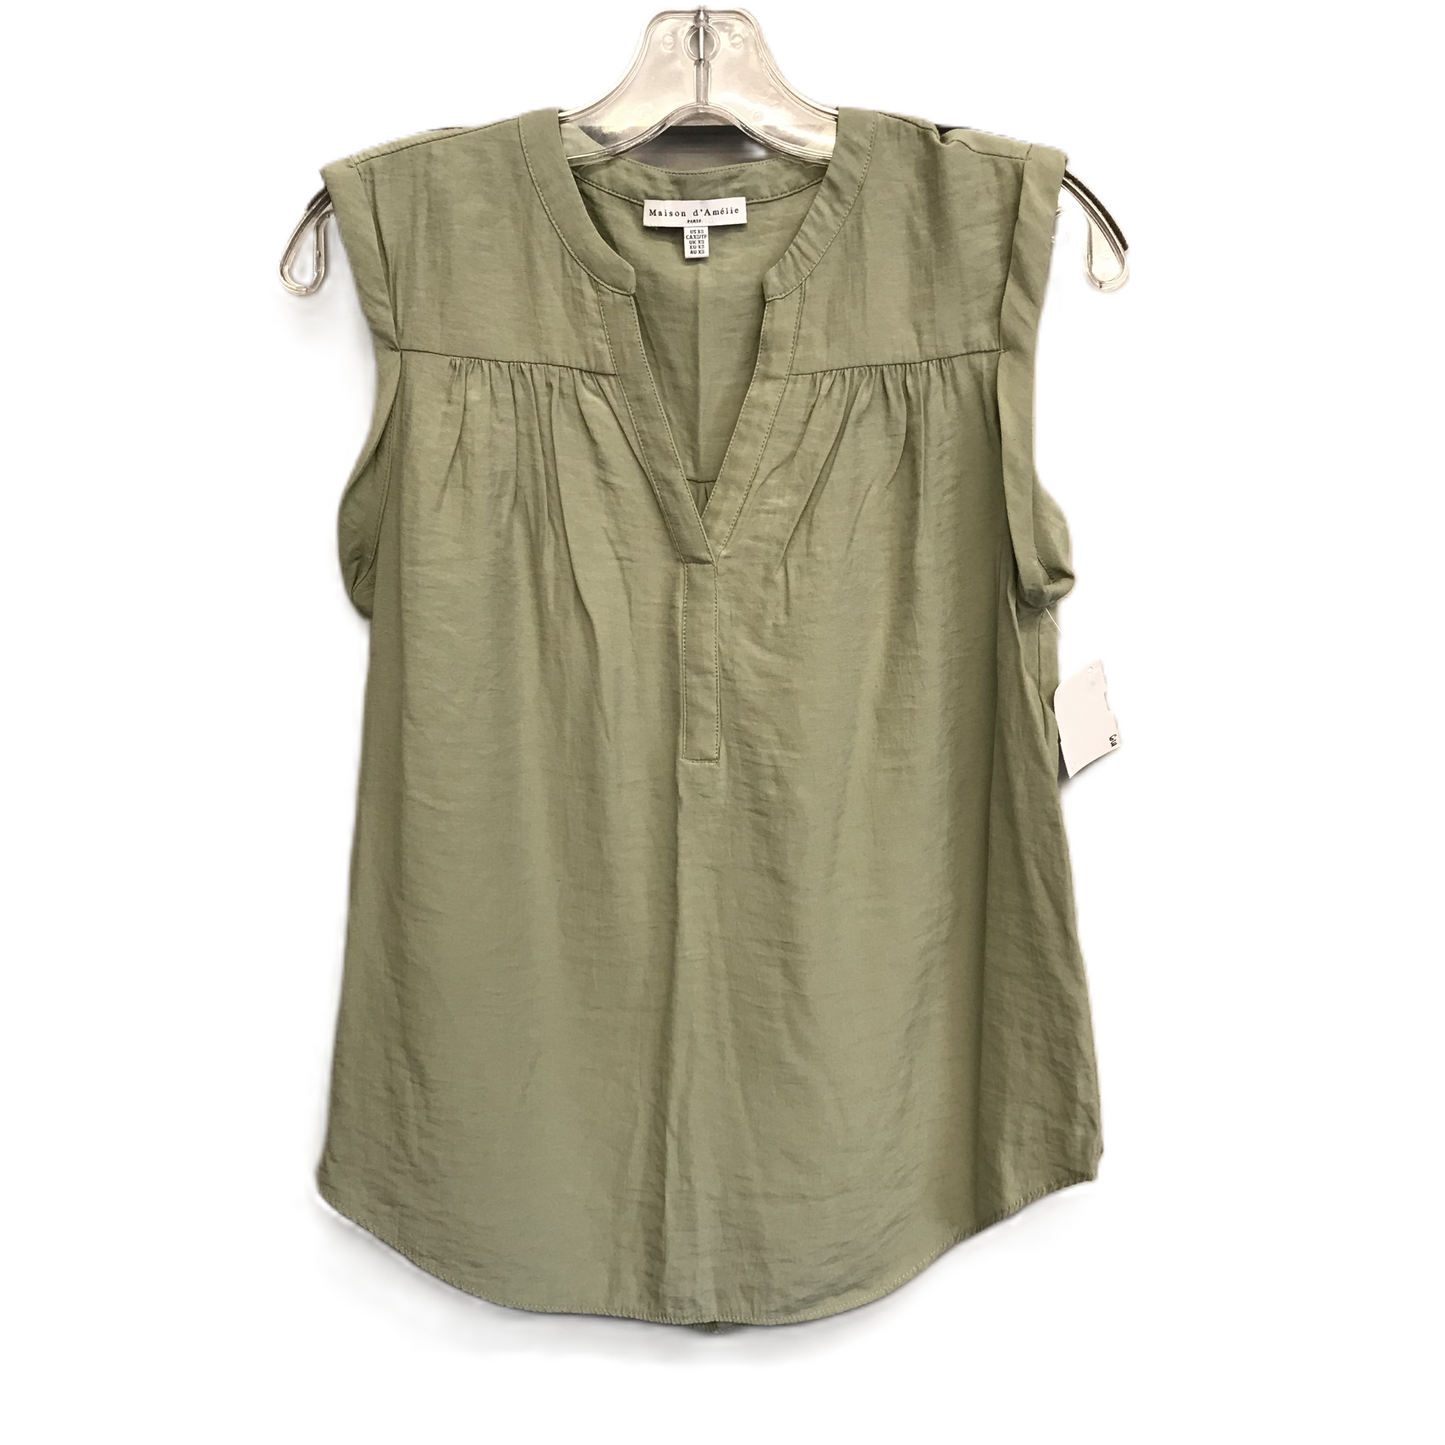 Green Top Short Sleeve By MAISON D’ AMELIE Size: Xs